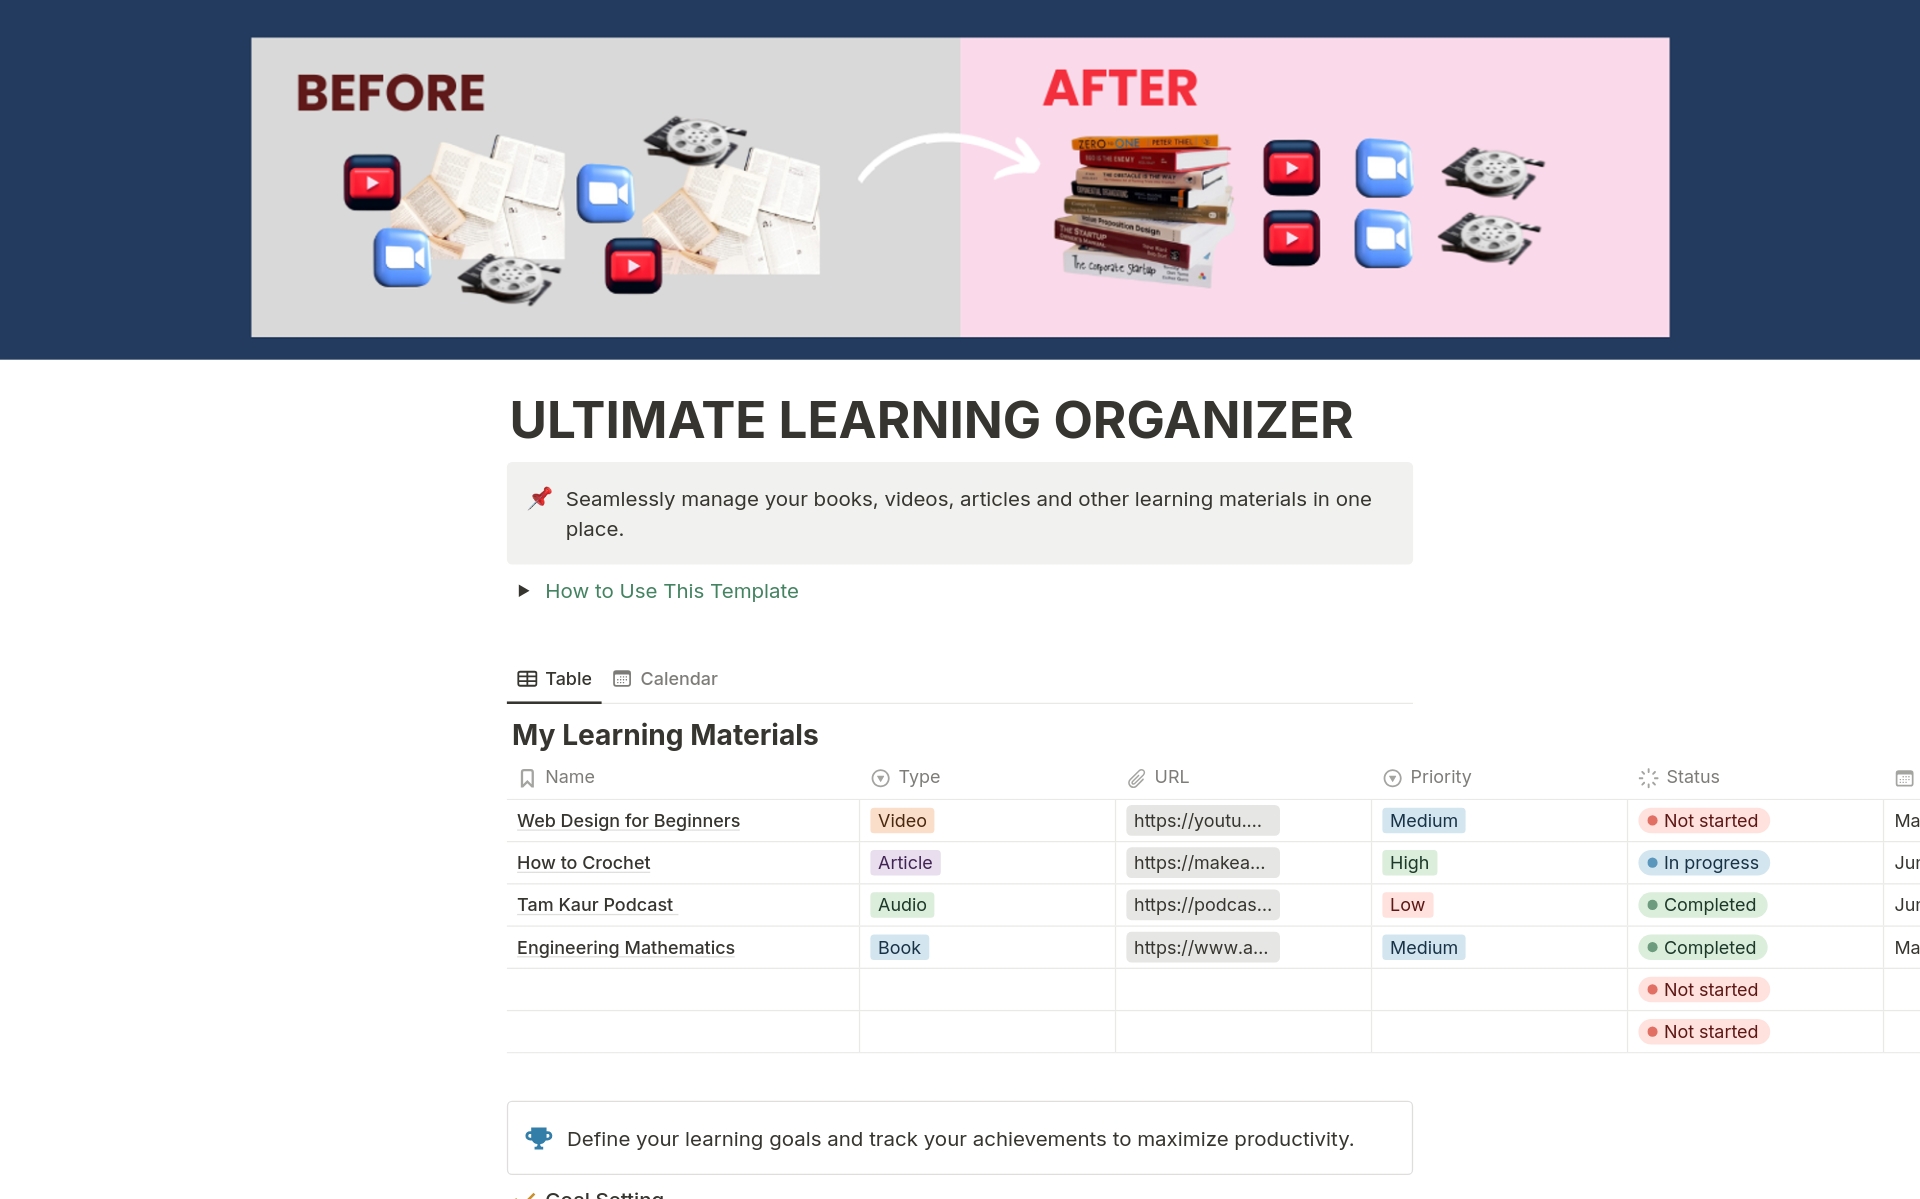 Are you tired of seeing your Learning Materials and Educational Resources scattered across different apps and platforms? Well I've got the solution for you. 